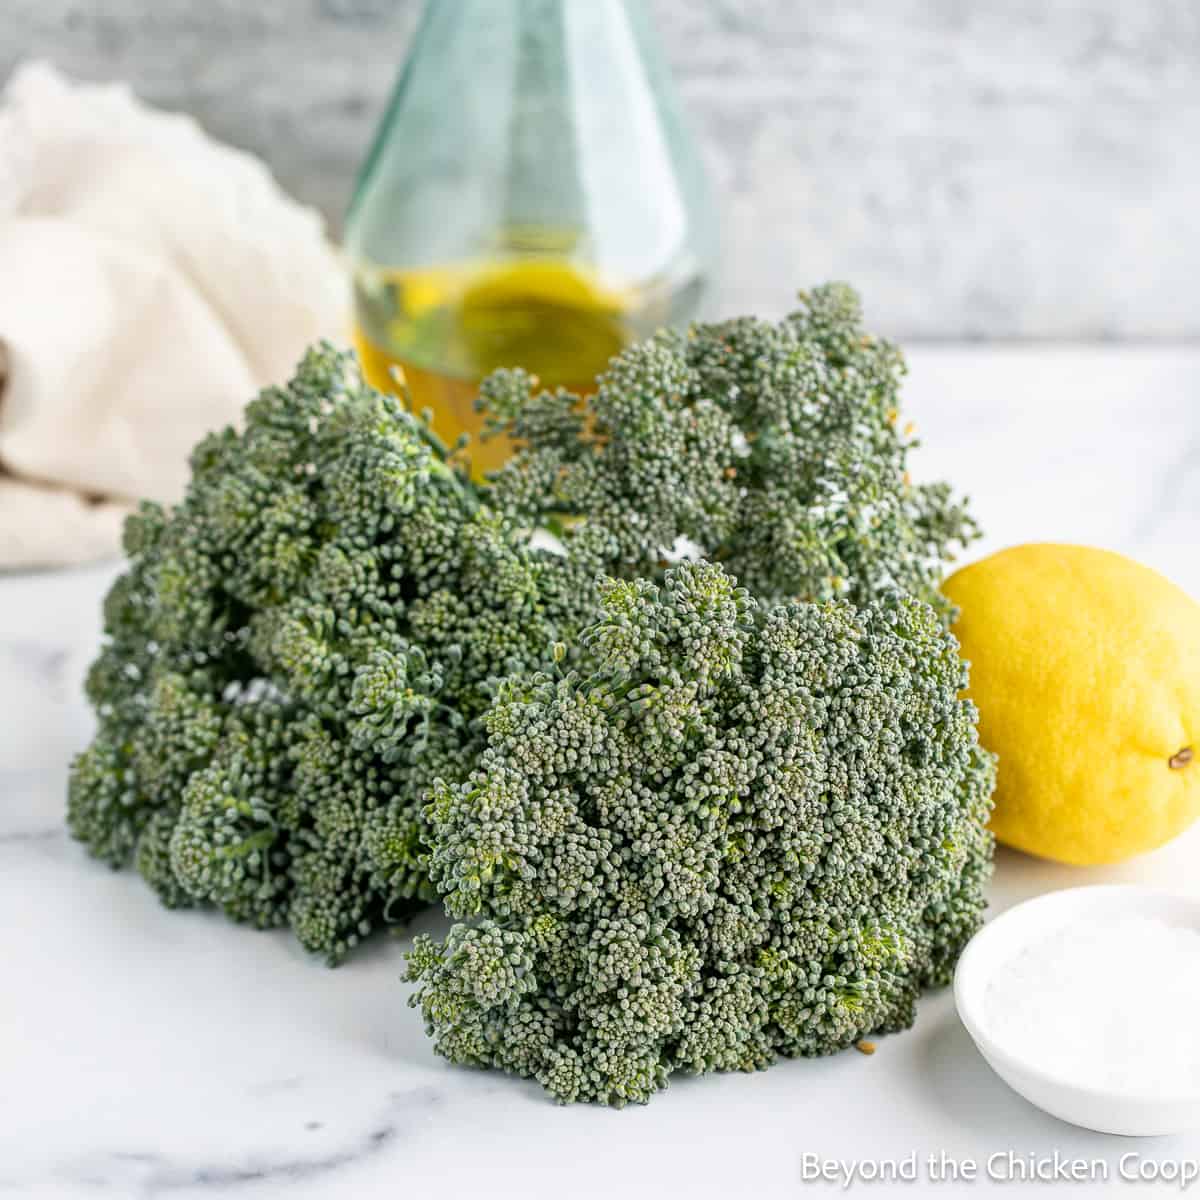 Heads of broccoli, a fresh lemon and a bottle of olive oil. 